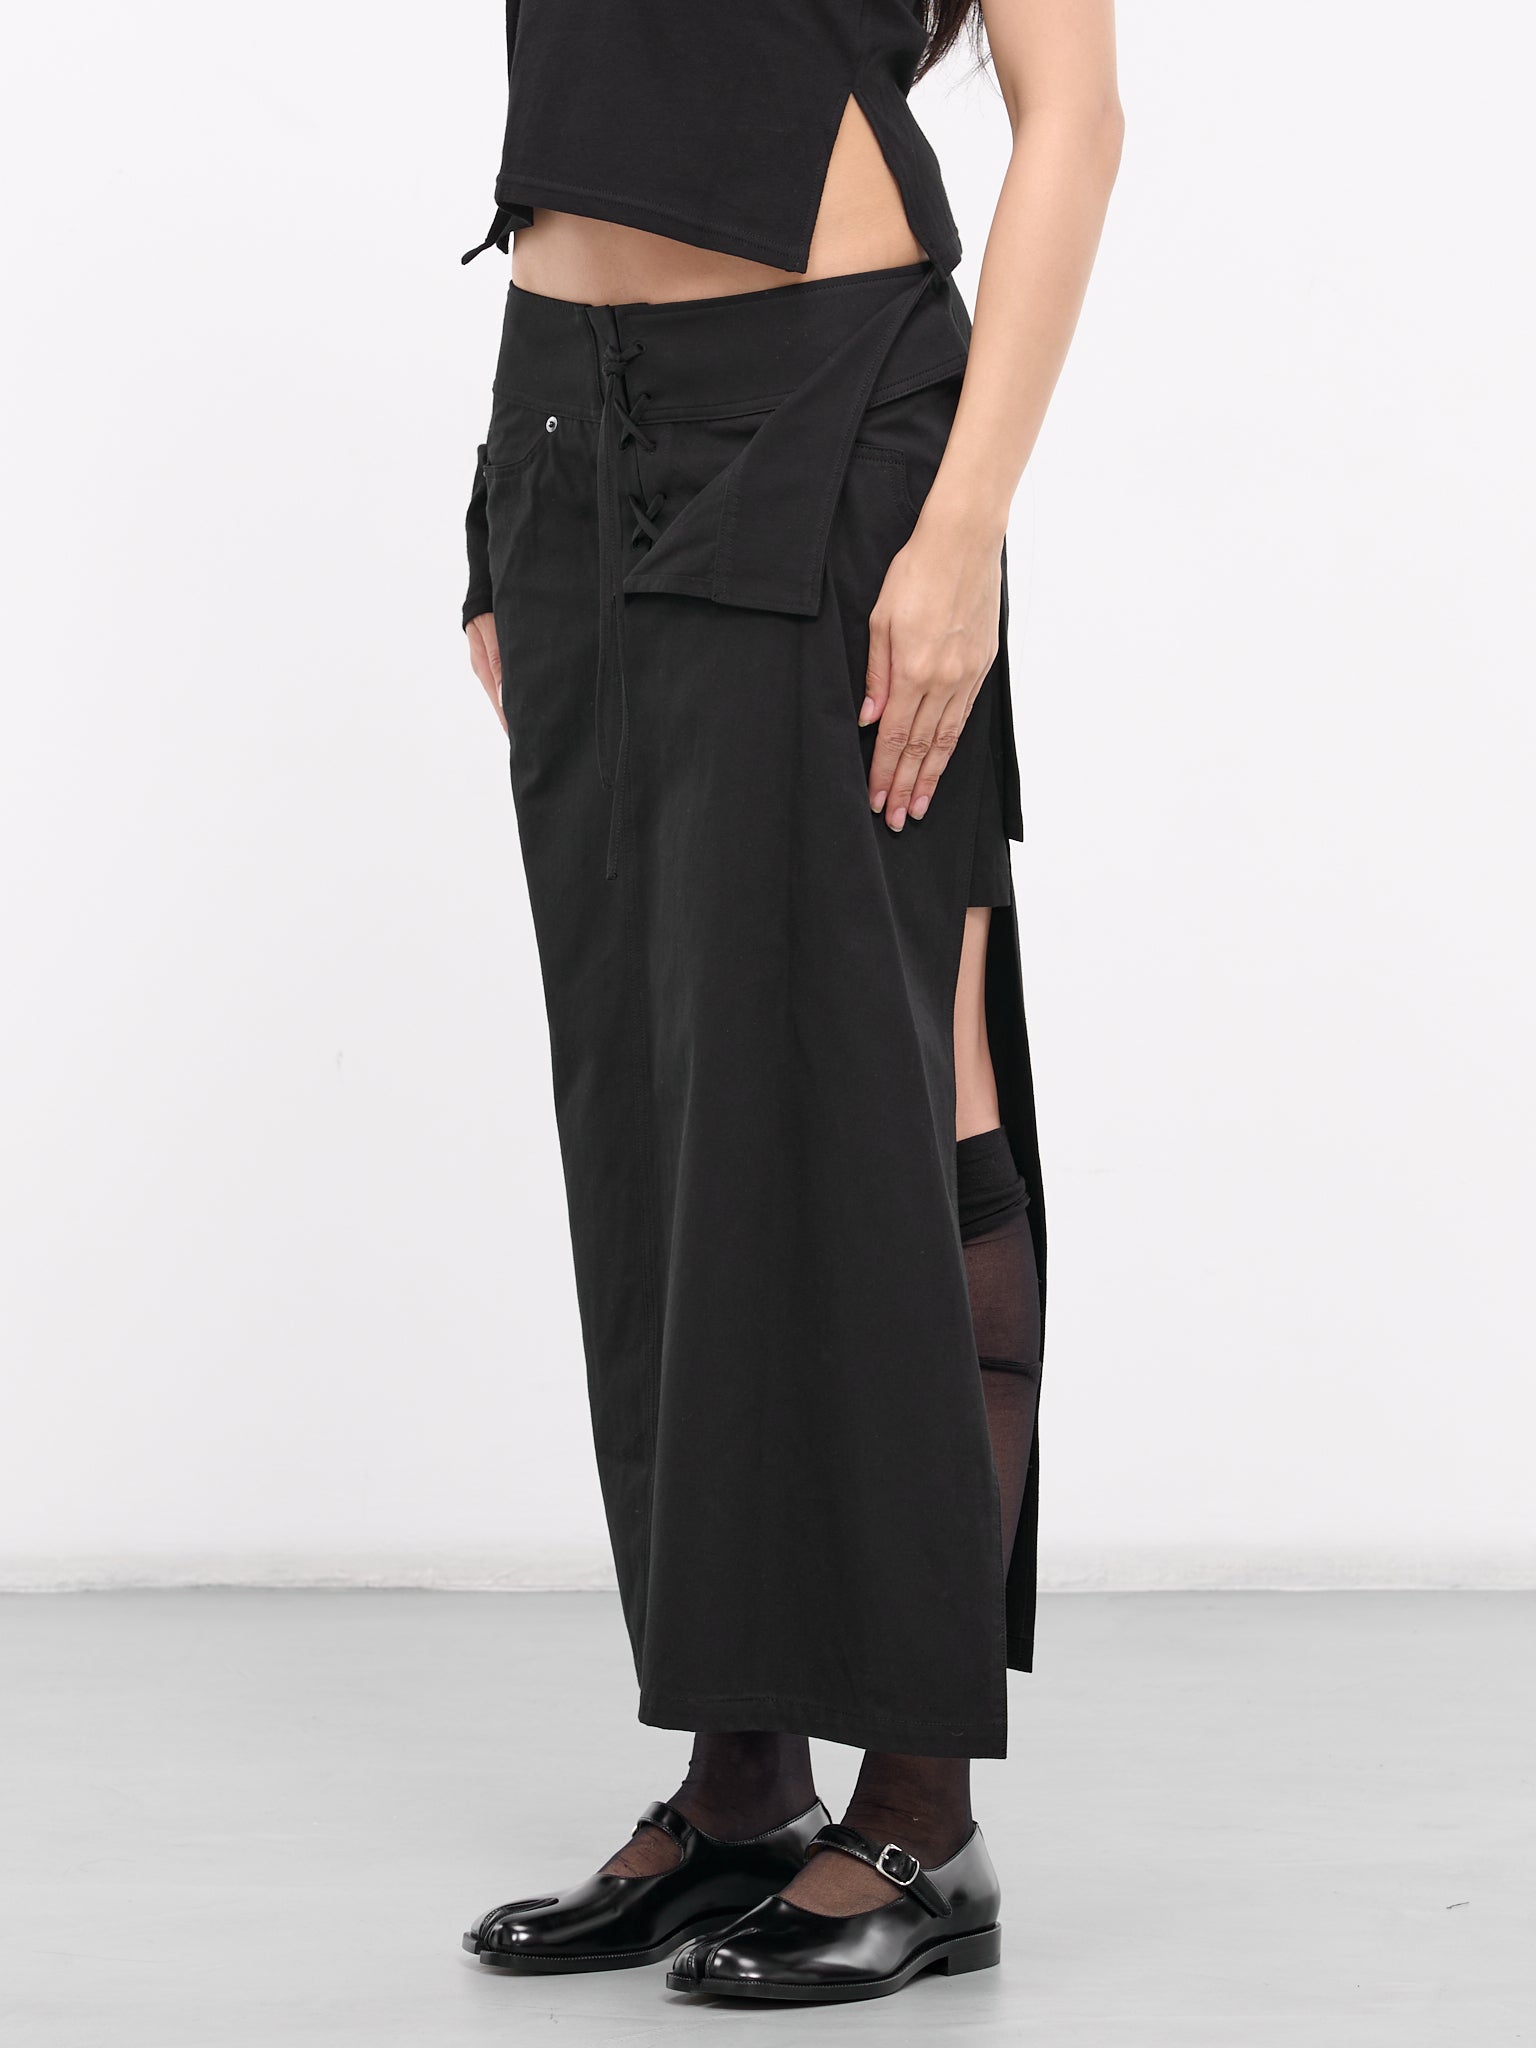 Lace-Up Maxi Skirt (FS-S68-002-BLACK)